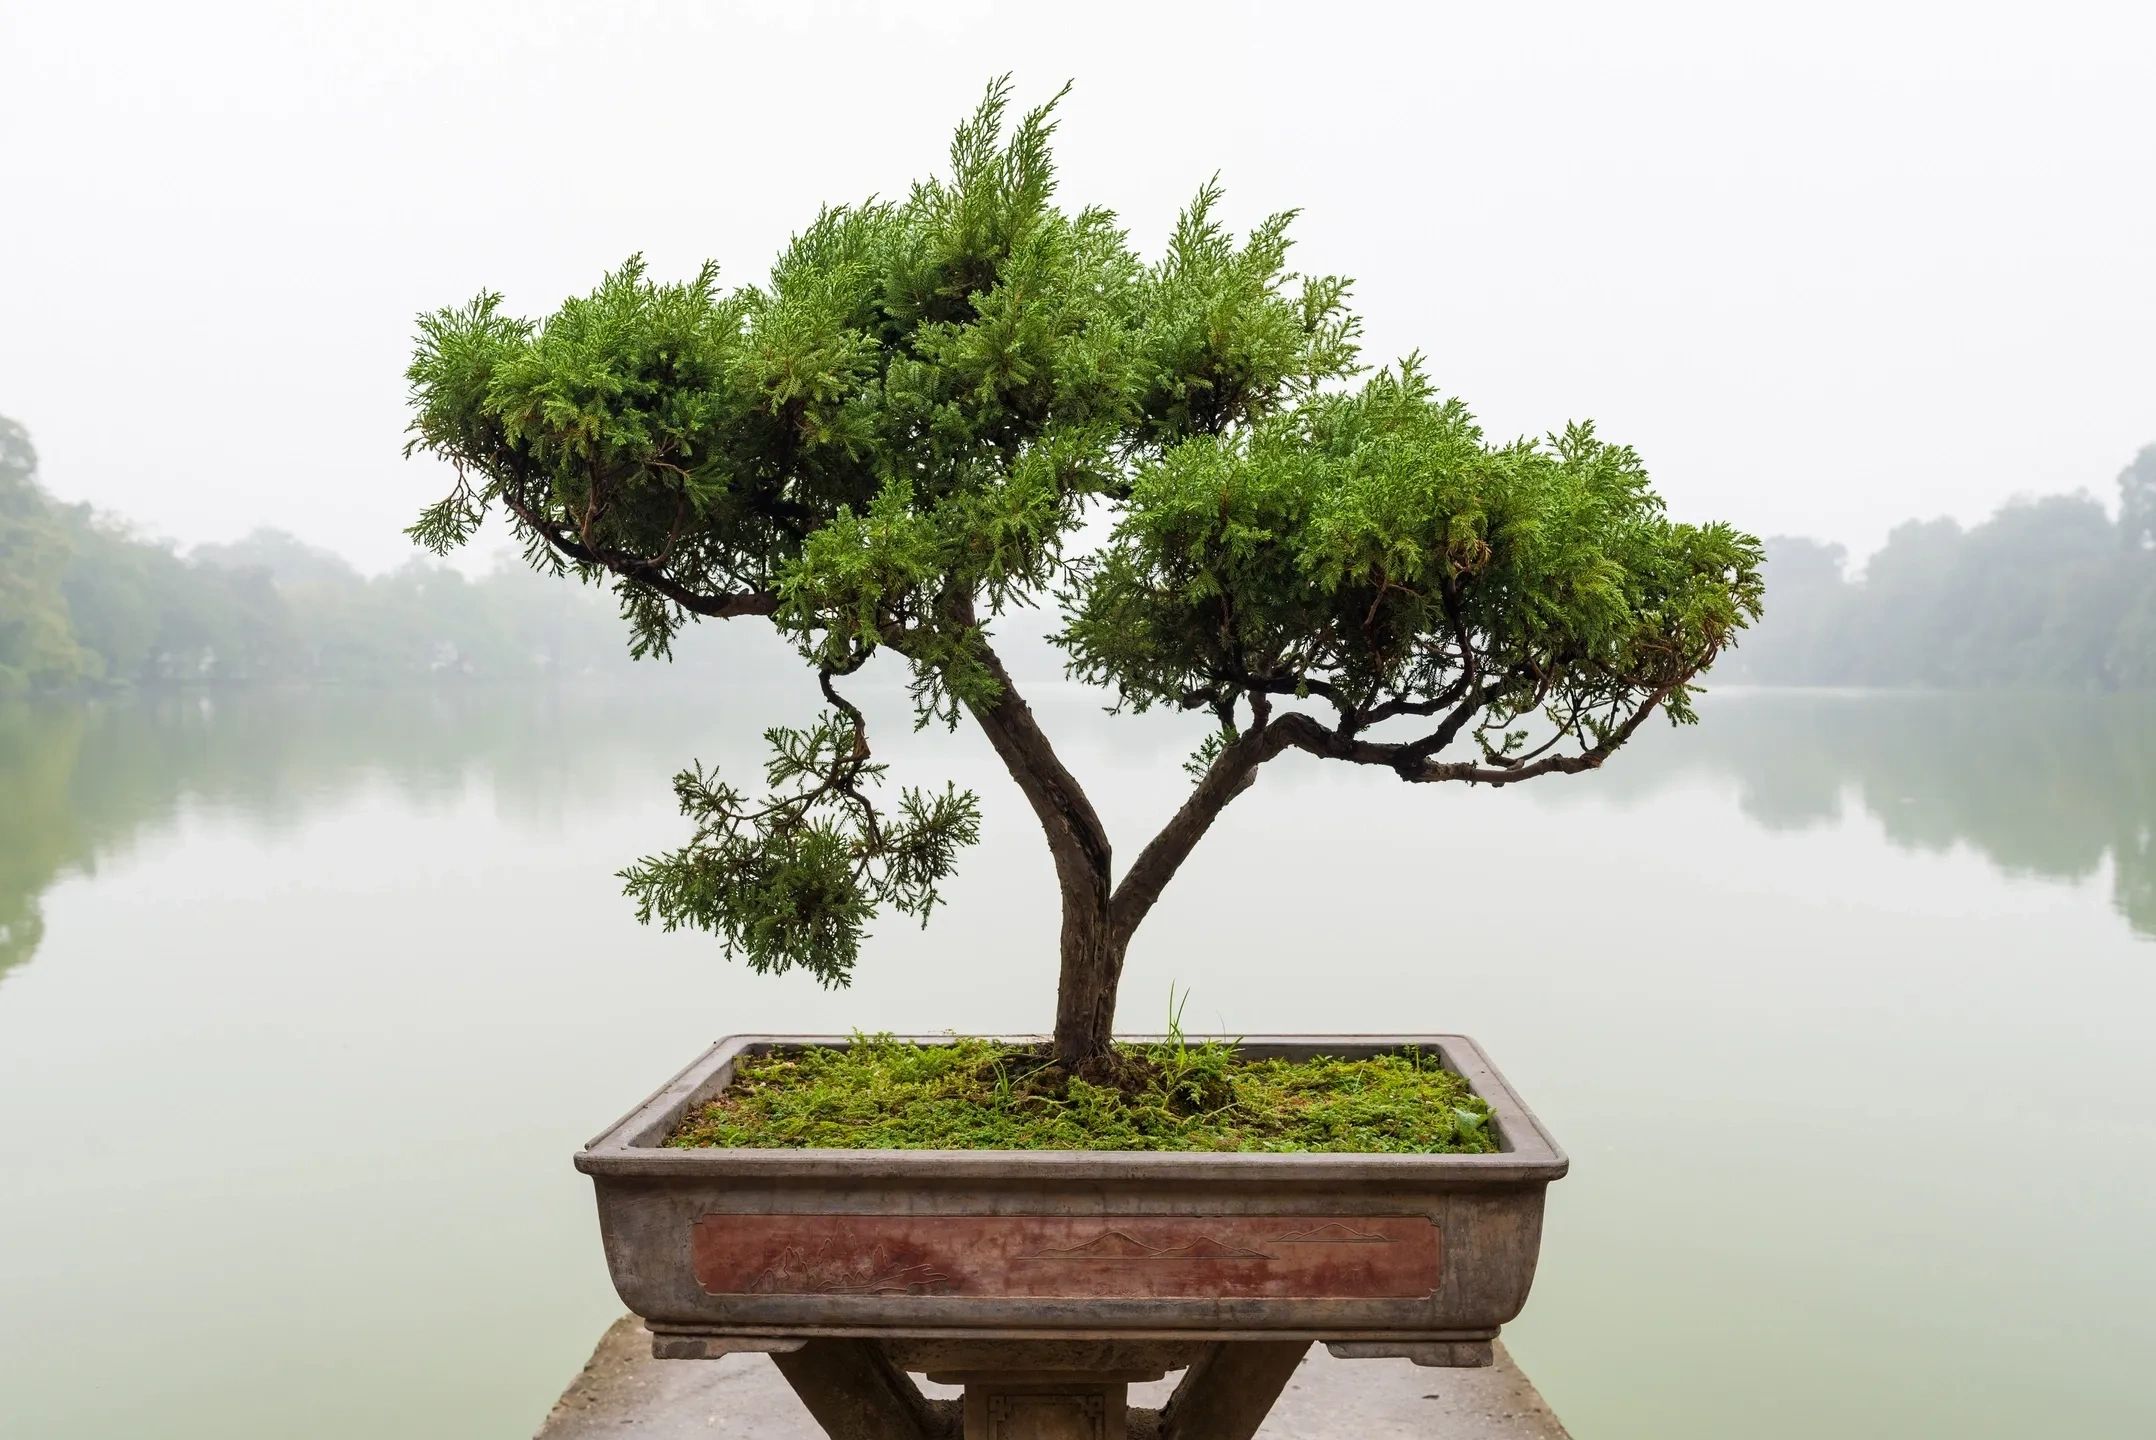 A bonsai plant in front of a lake